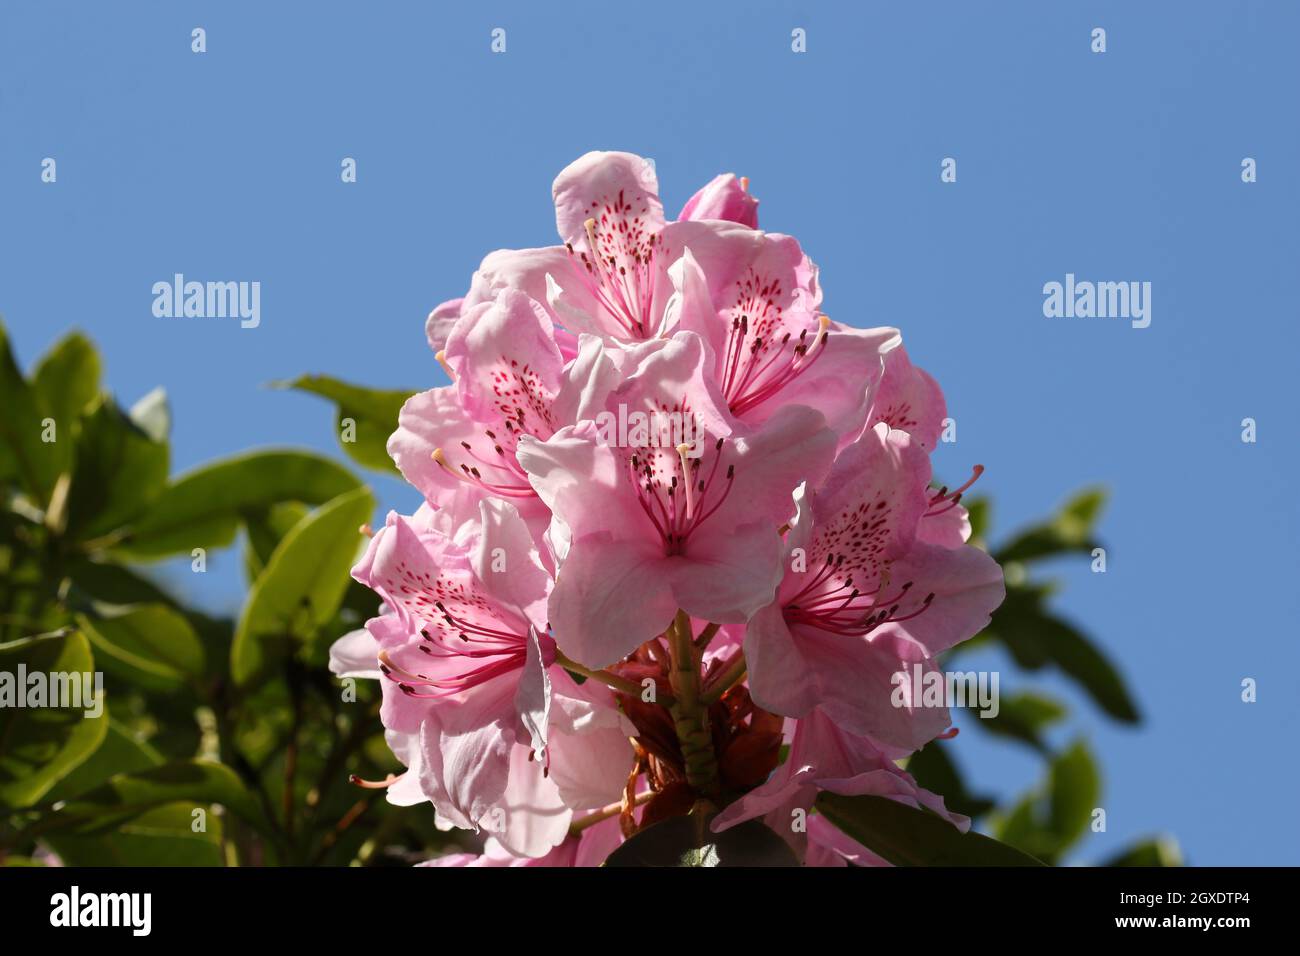 Pink Rhododendron flowers with dark pink spots on the petals with a blurred background of leaves and blue sky and good copy space. Stock Photo